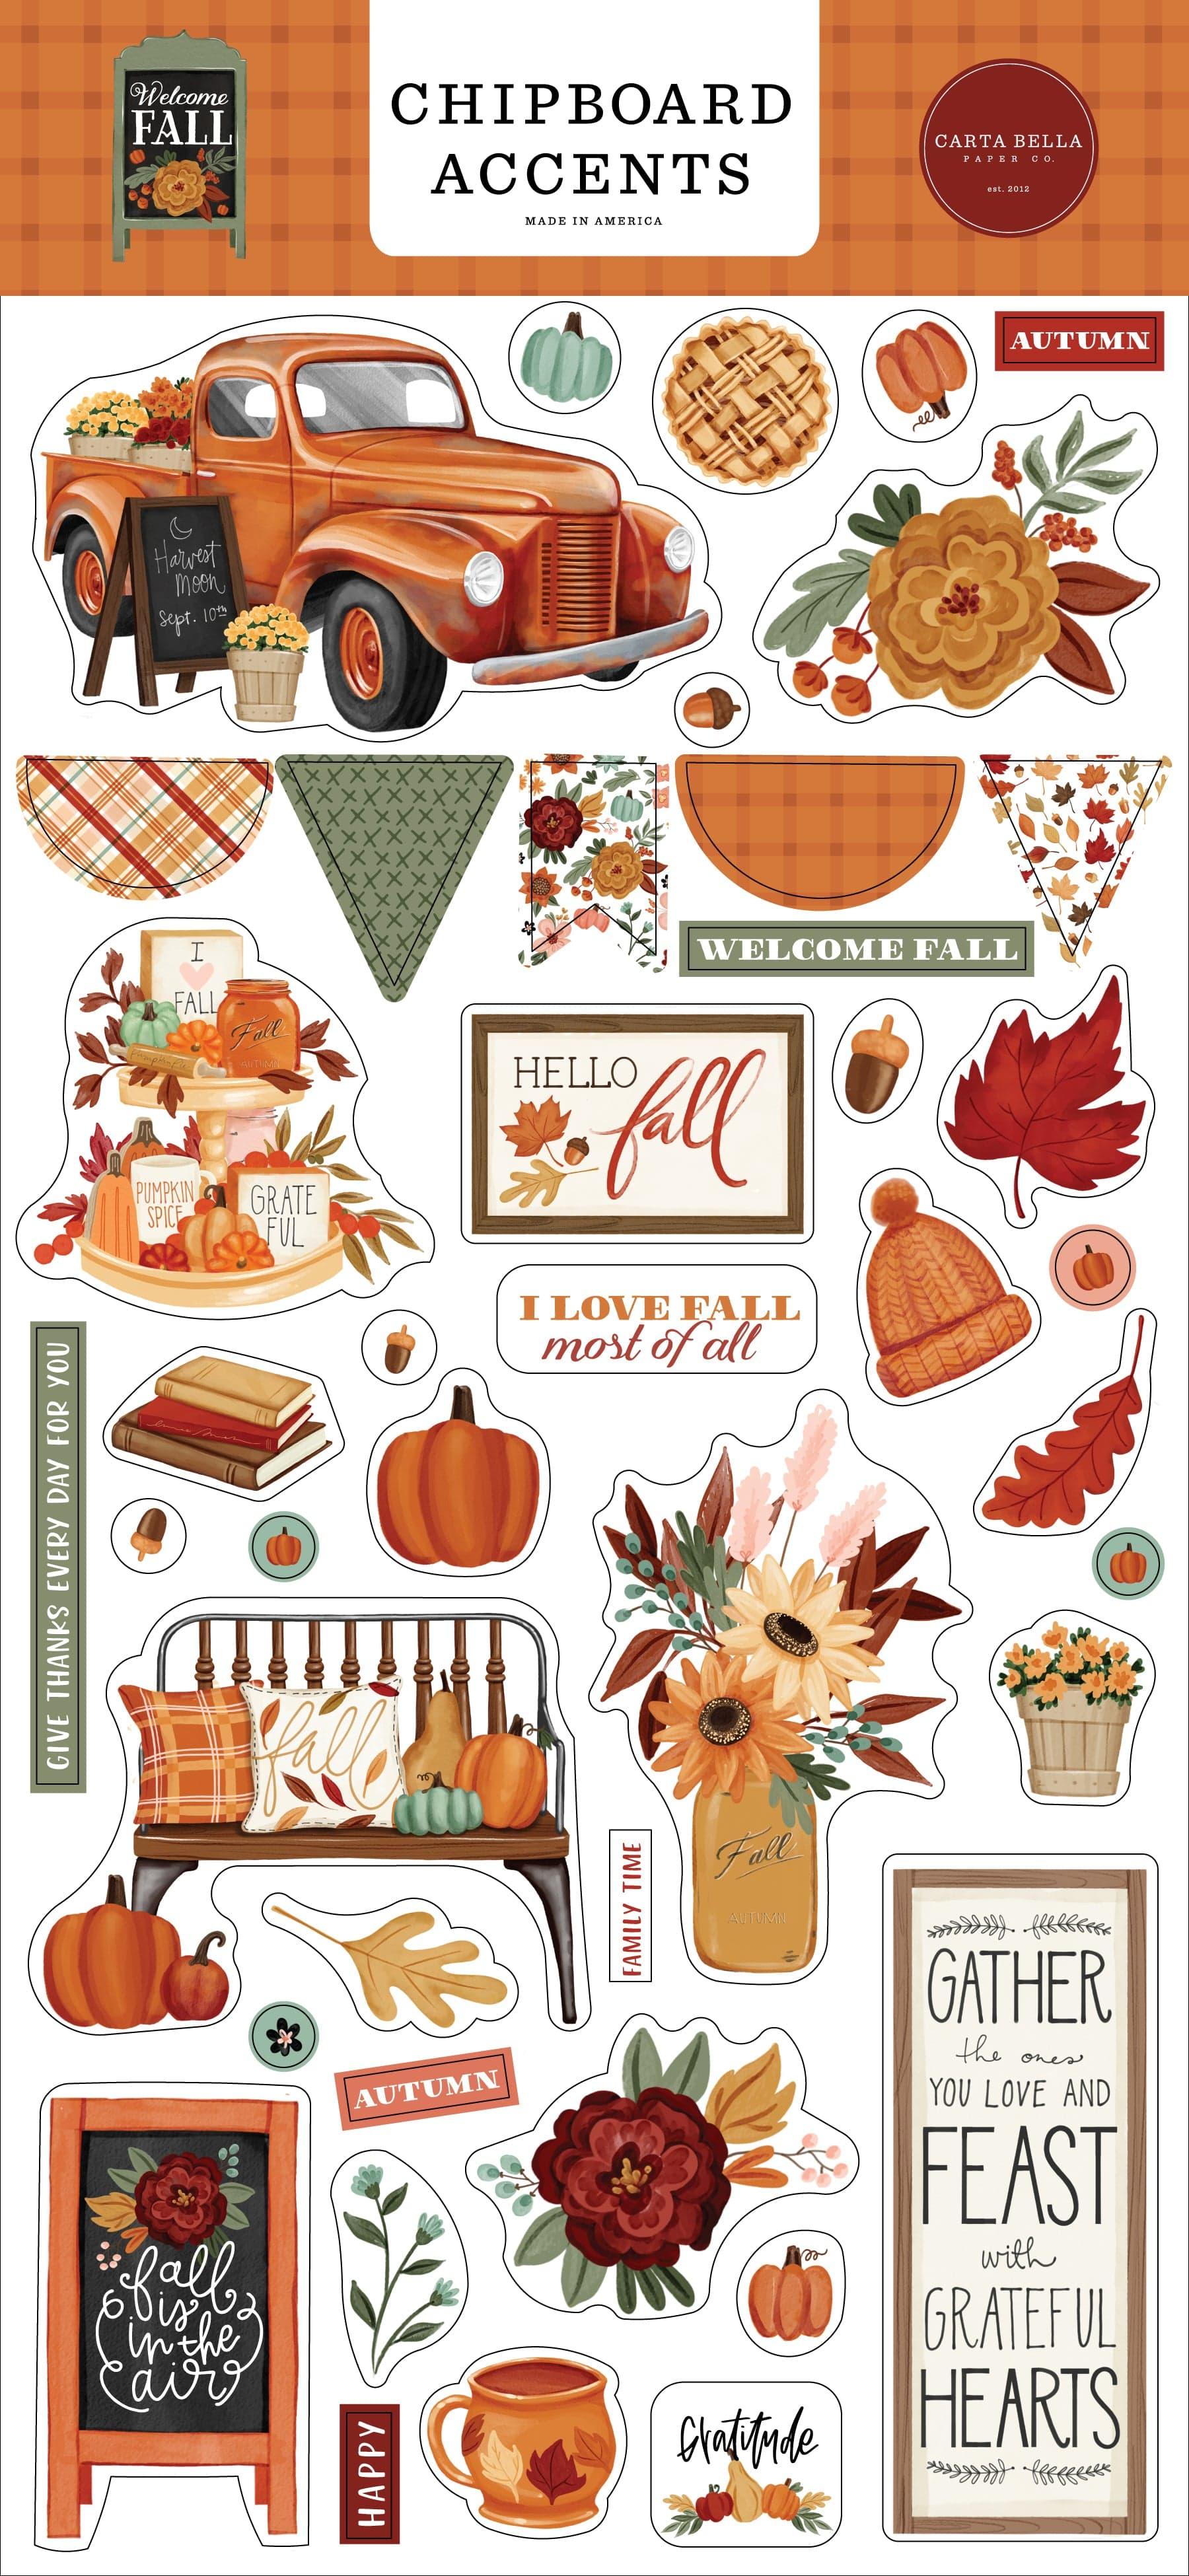 Welcome Fall Collection 6 x 12 Scrapbook Chipboard Accents by Carta Bella - Scrapbook Supply Companies